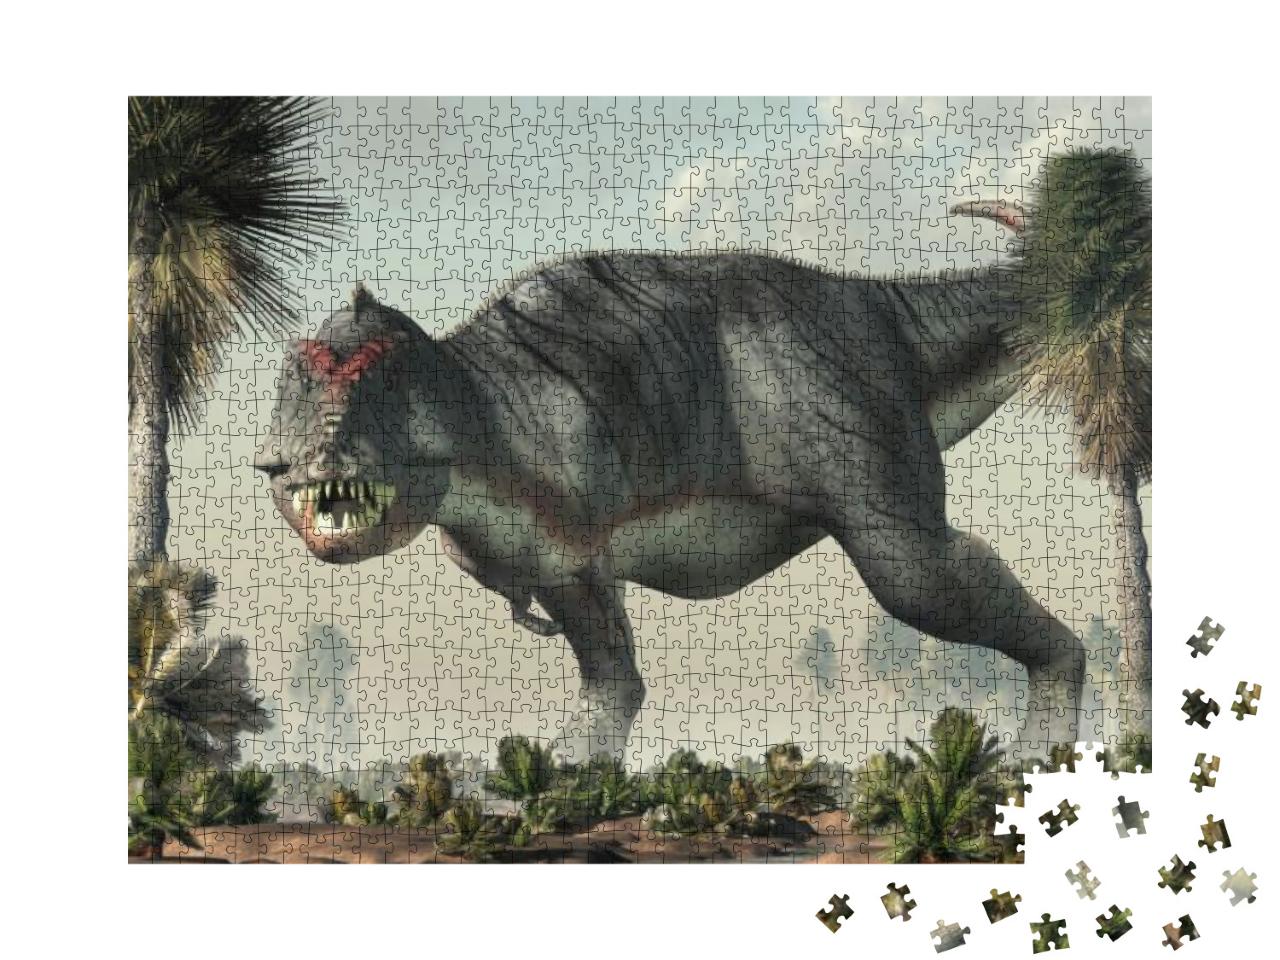 A Gray Tyrannosaurus Rex Stands in a Prehistoric Wetland... Jigsaw Puzzle with 1000 pieces